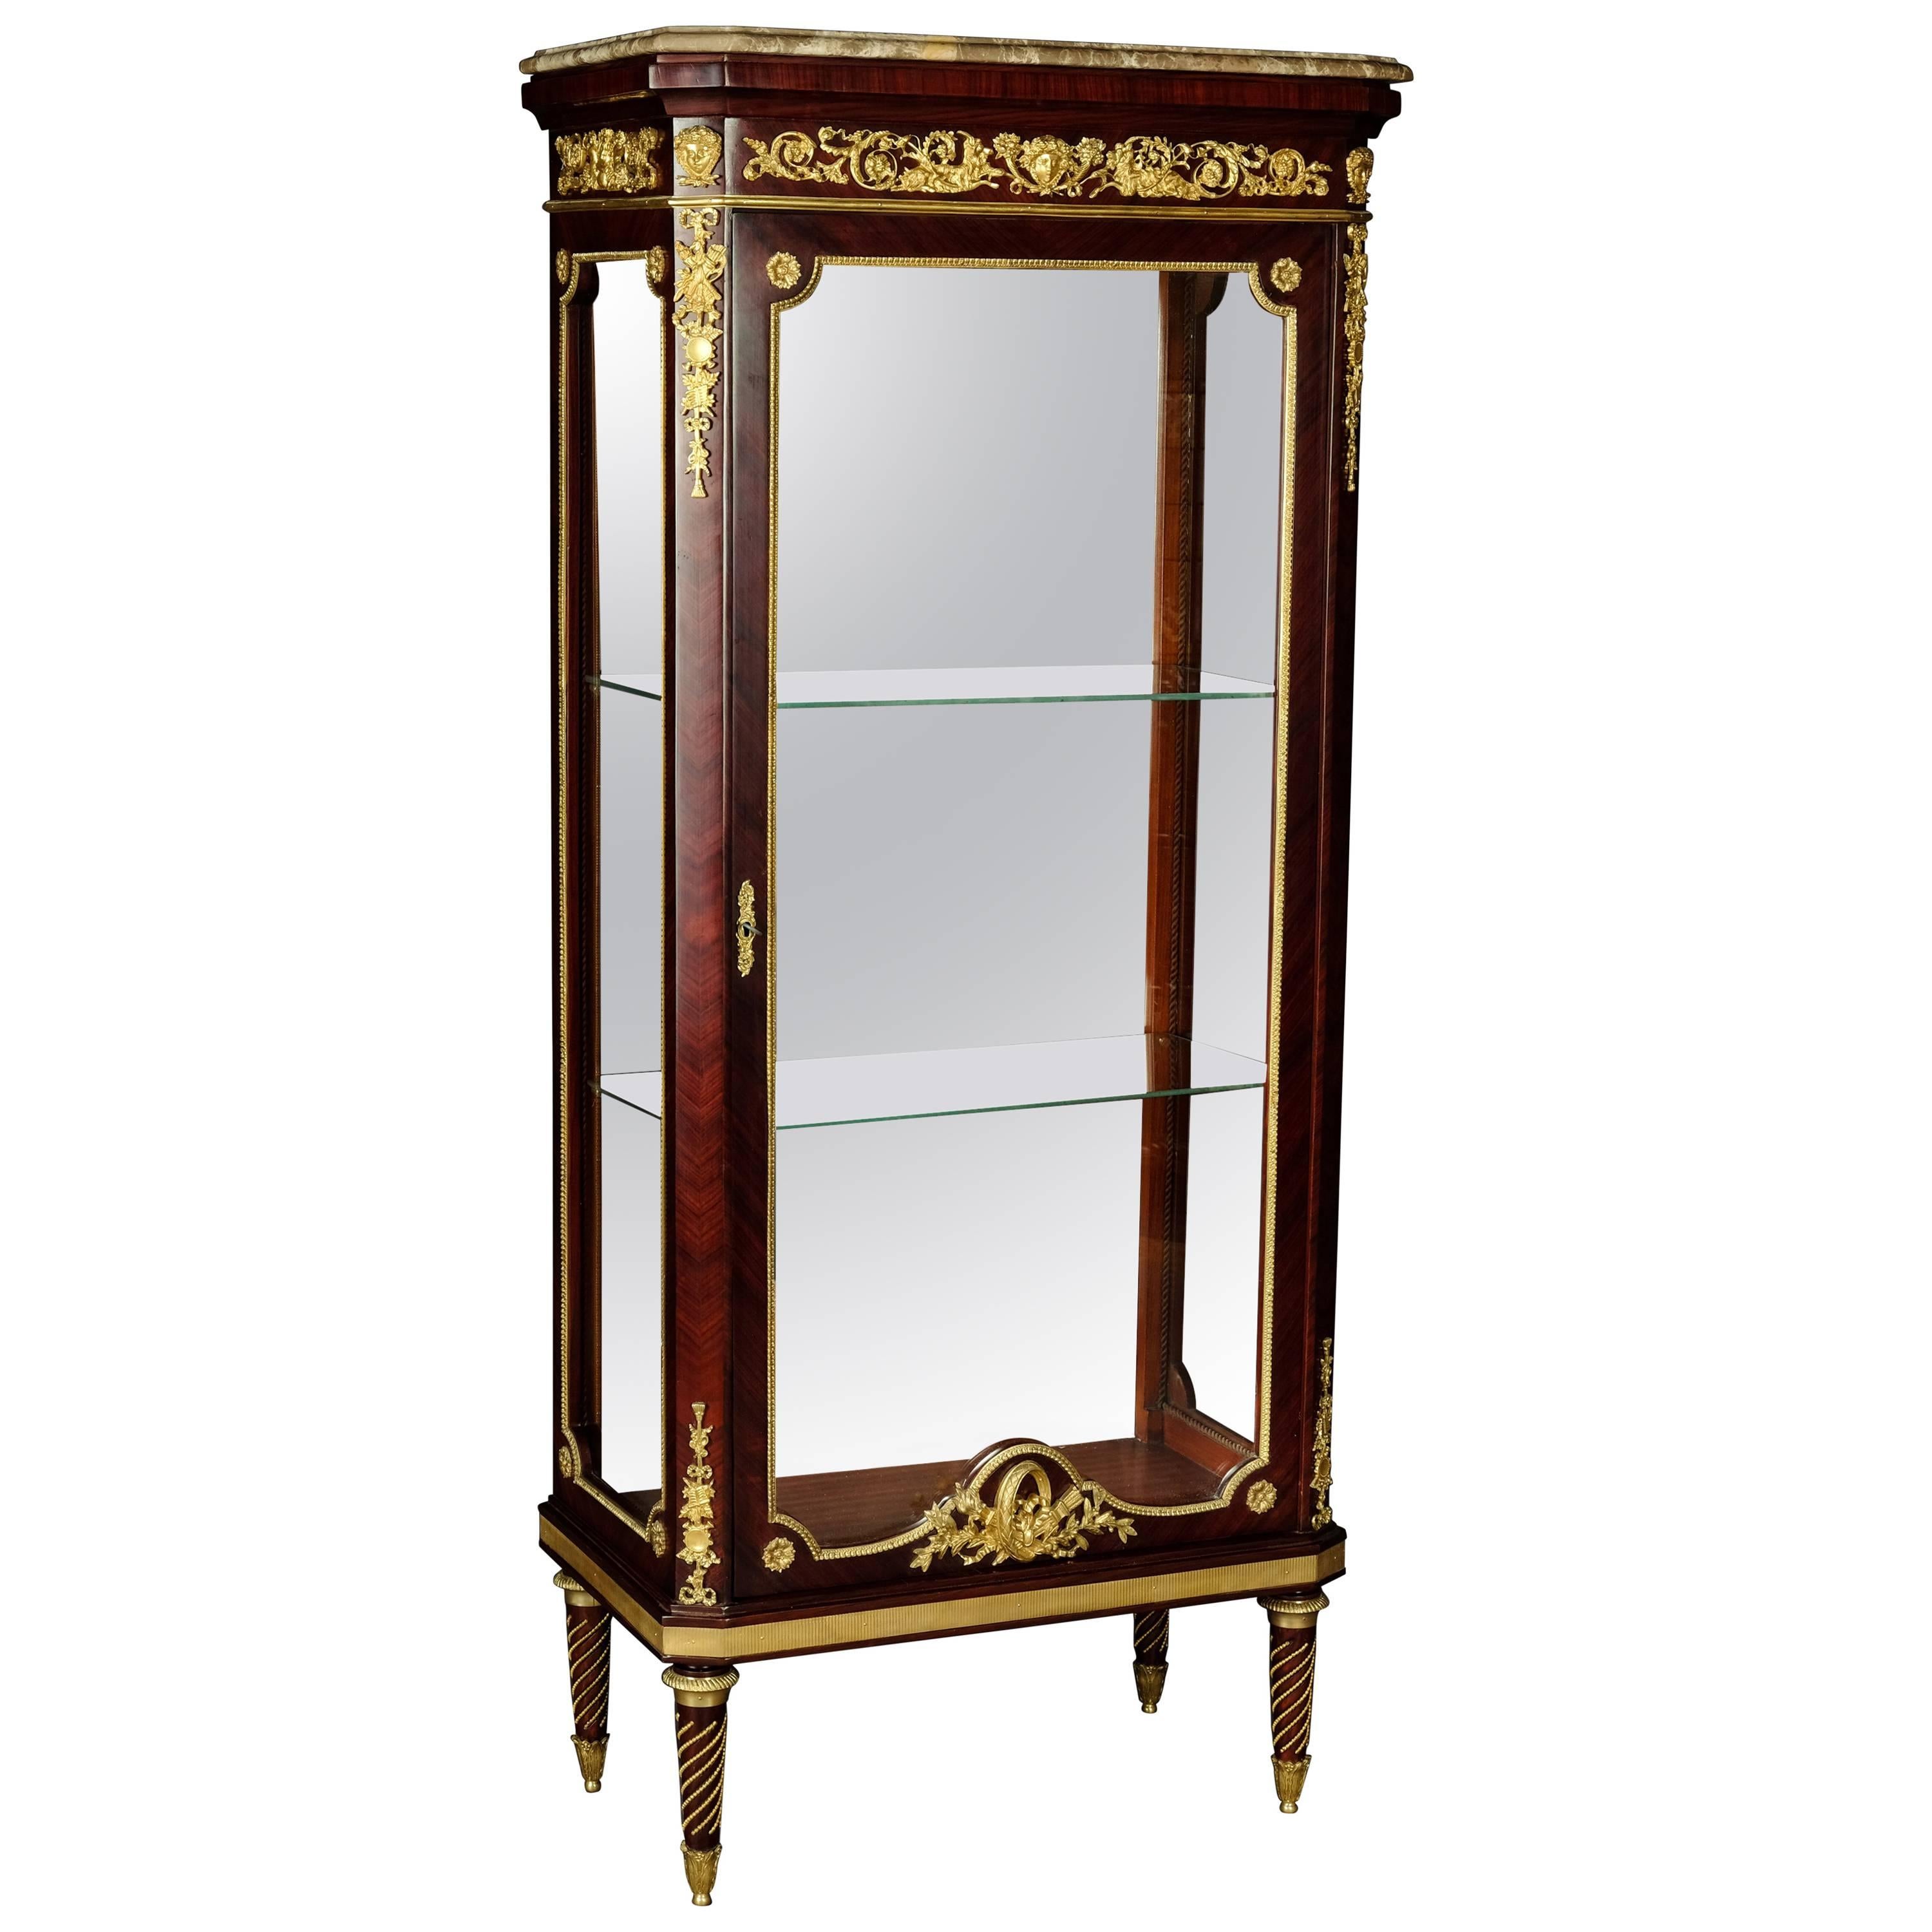 Exclusive French Vitrine in Louis XVI Style